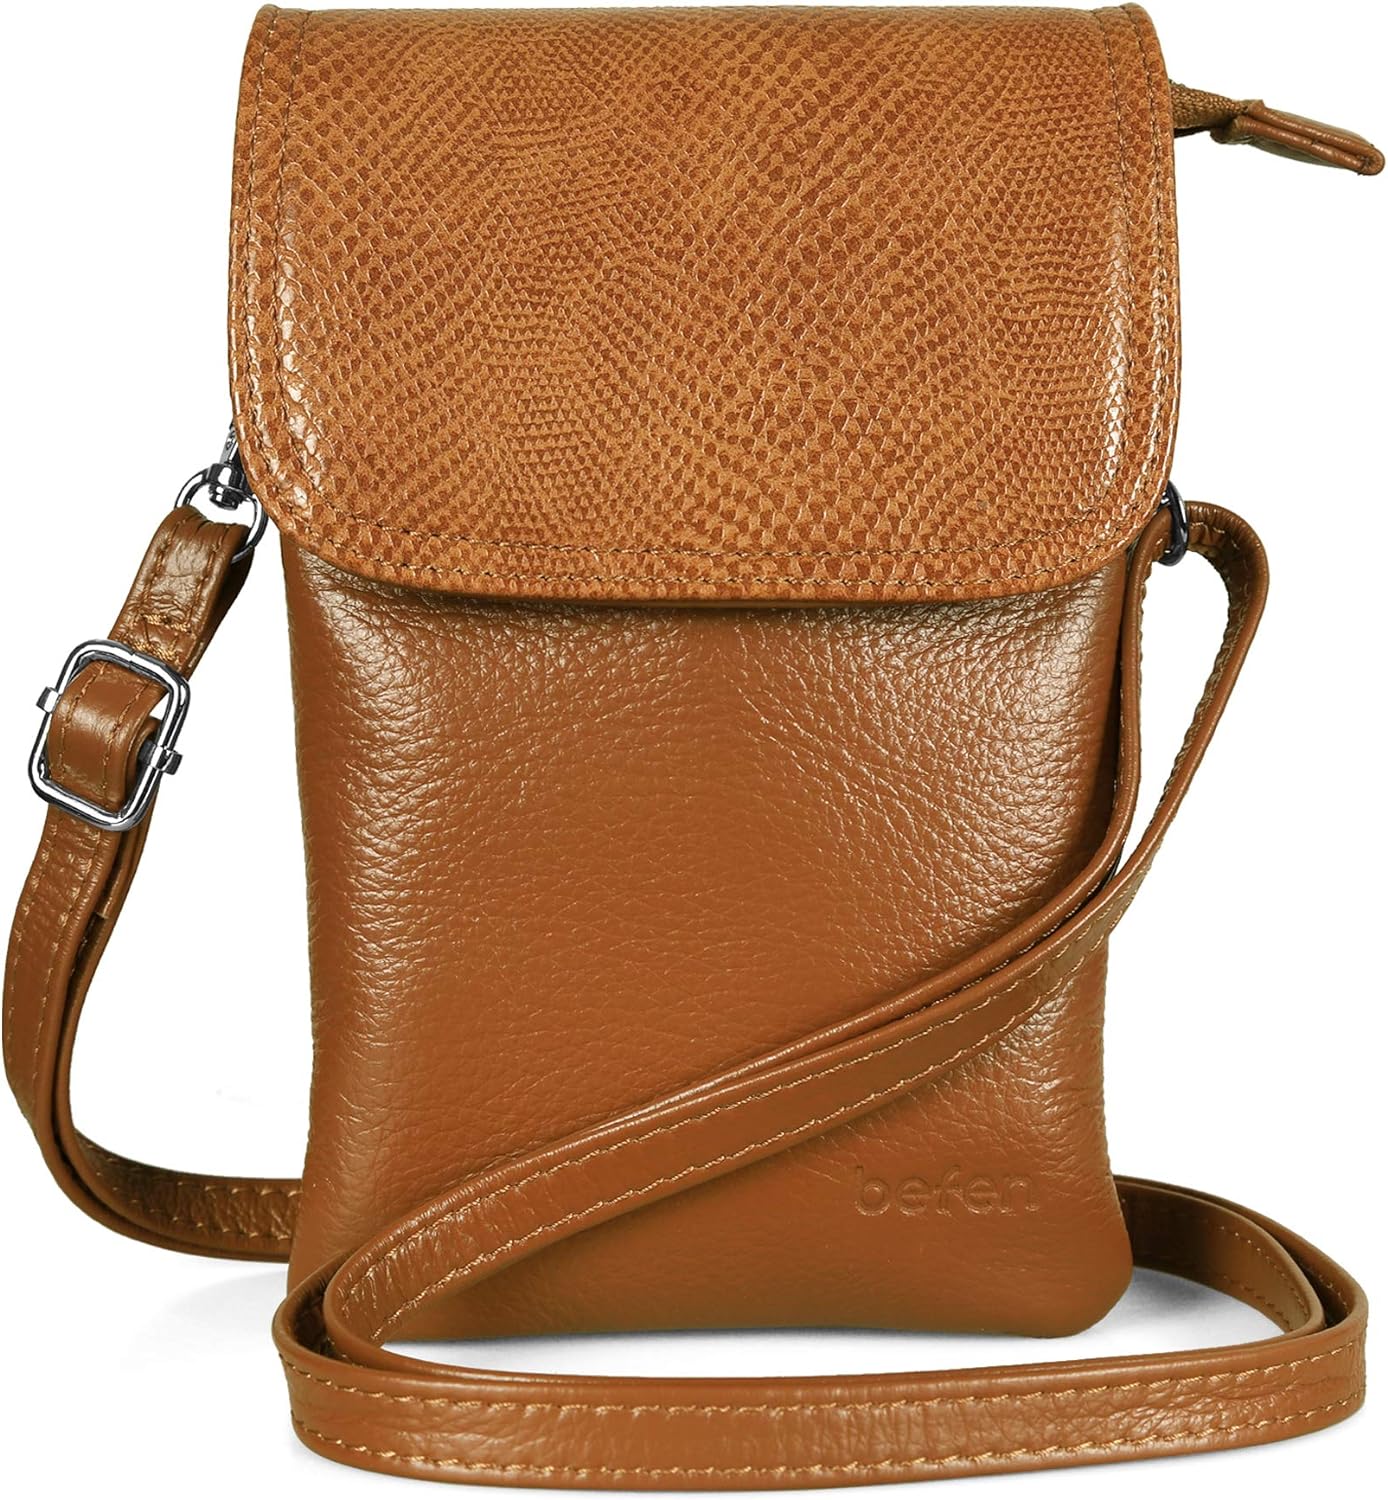 This is a great find. It is real leather; looks, feels, and smells like leather. Great size, well made, just what I needed. I highly recommend it if youre looking for a nice quality small crossbody bag.